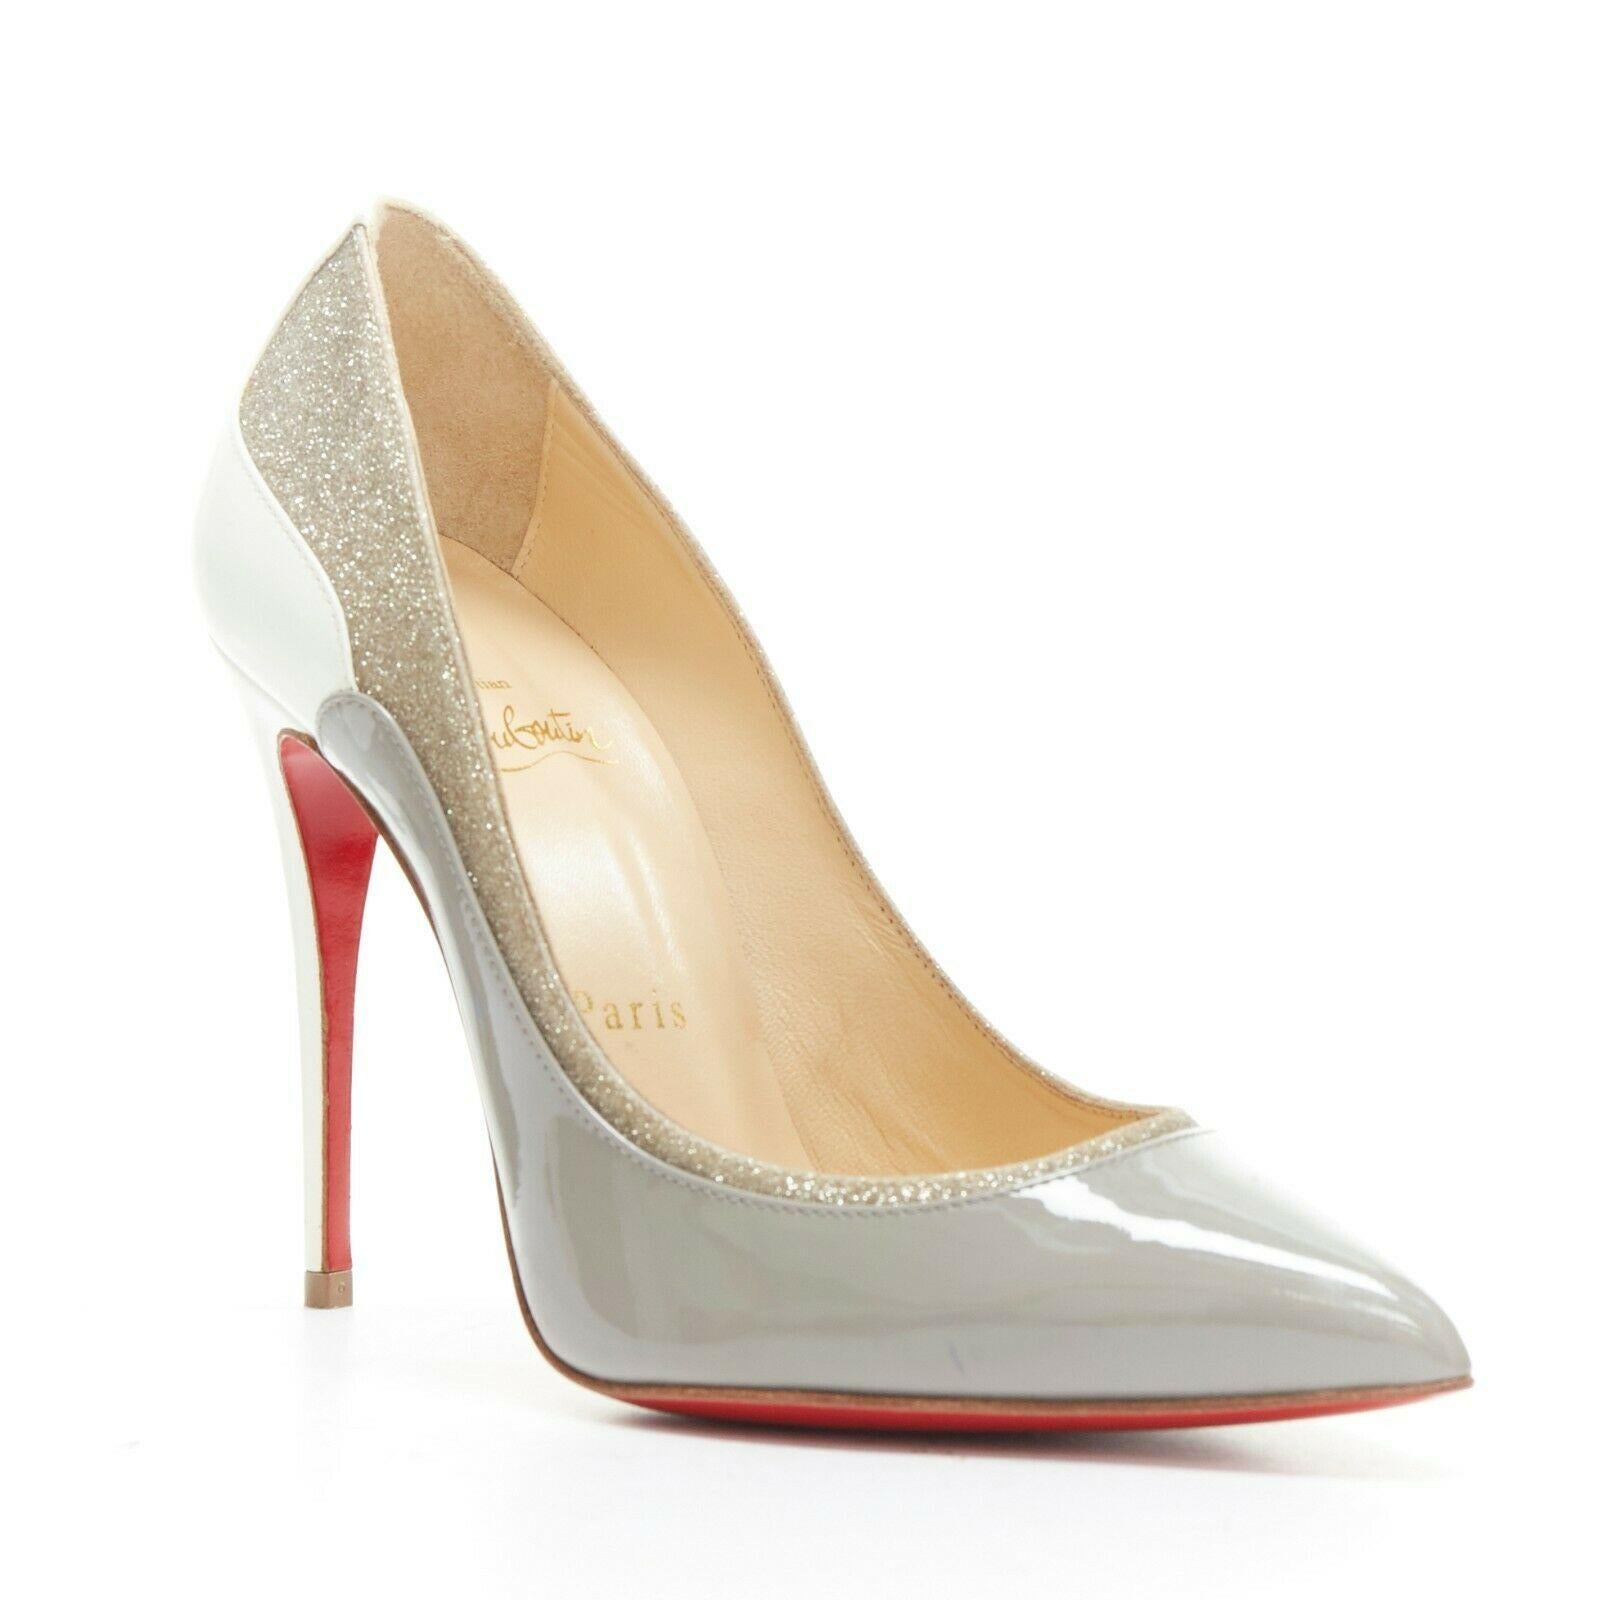 CHRISTIAN LOUBOUTIN Tucsick 100 grey white glitter patent pump high heel EU36
CHRISTIAN LOUBOUTIN
Style Arletta 105. Scarpin silhouette. 
Constructed with grey, white patent and glittered leather. Pointed toe design. Interior lined with tan leather.